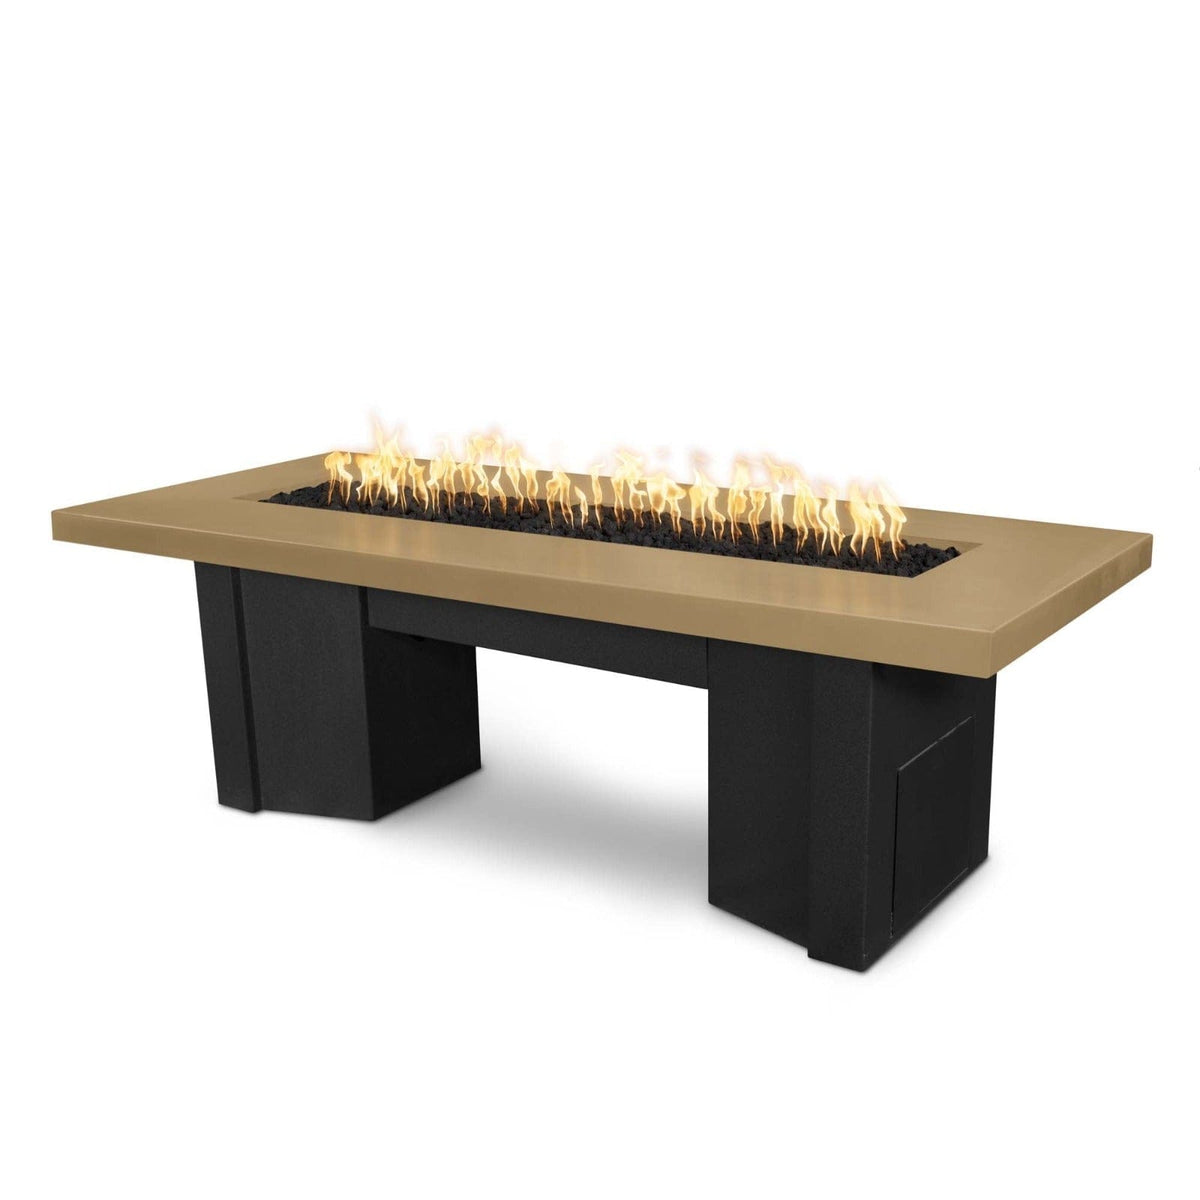 The Outdoor Plus Fire Features Brown (-BRN) / Black Powder Coated Steel (-BLK) The Outdoor Plus 78&quot; Alameda Fire Table Smooth Concrete in Liquid Propane - Flame Sense System with Push Button Spark Igniter / OPT-ALMGFRC78FSEN-LP